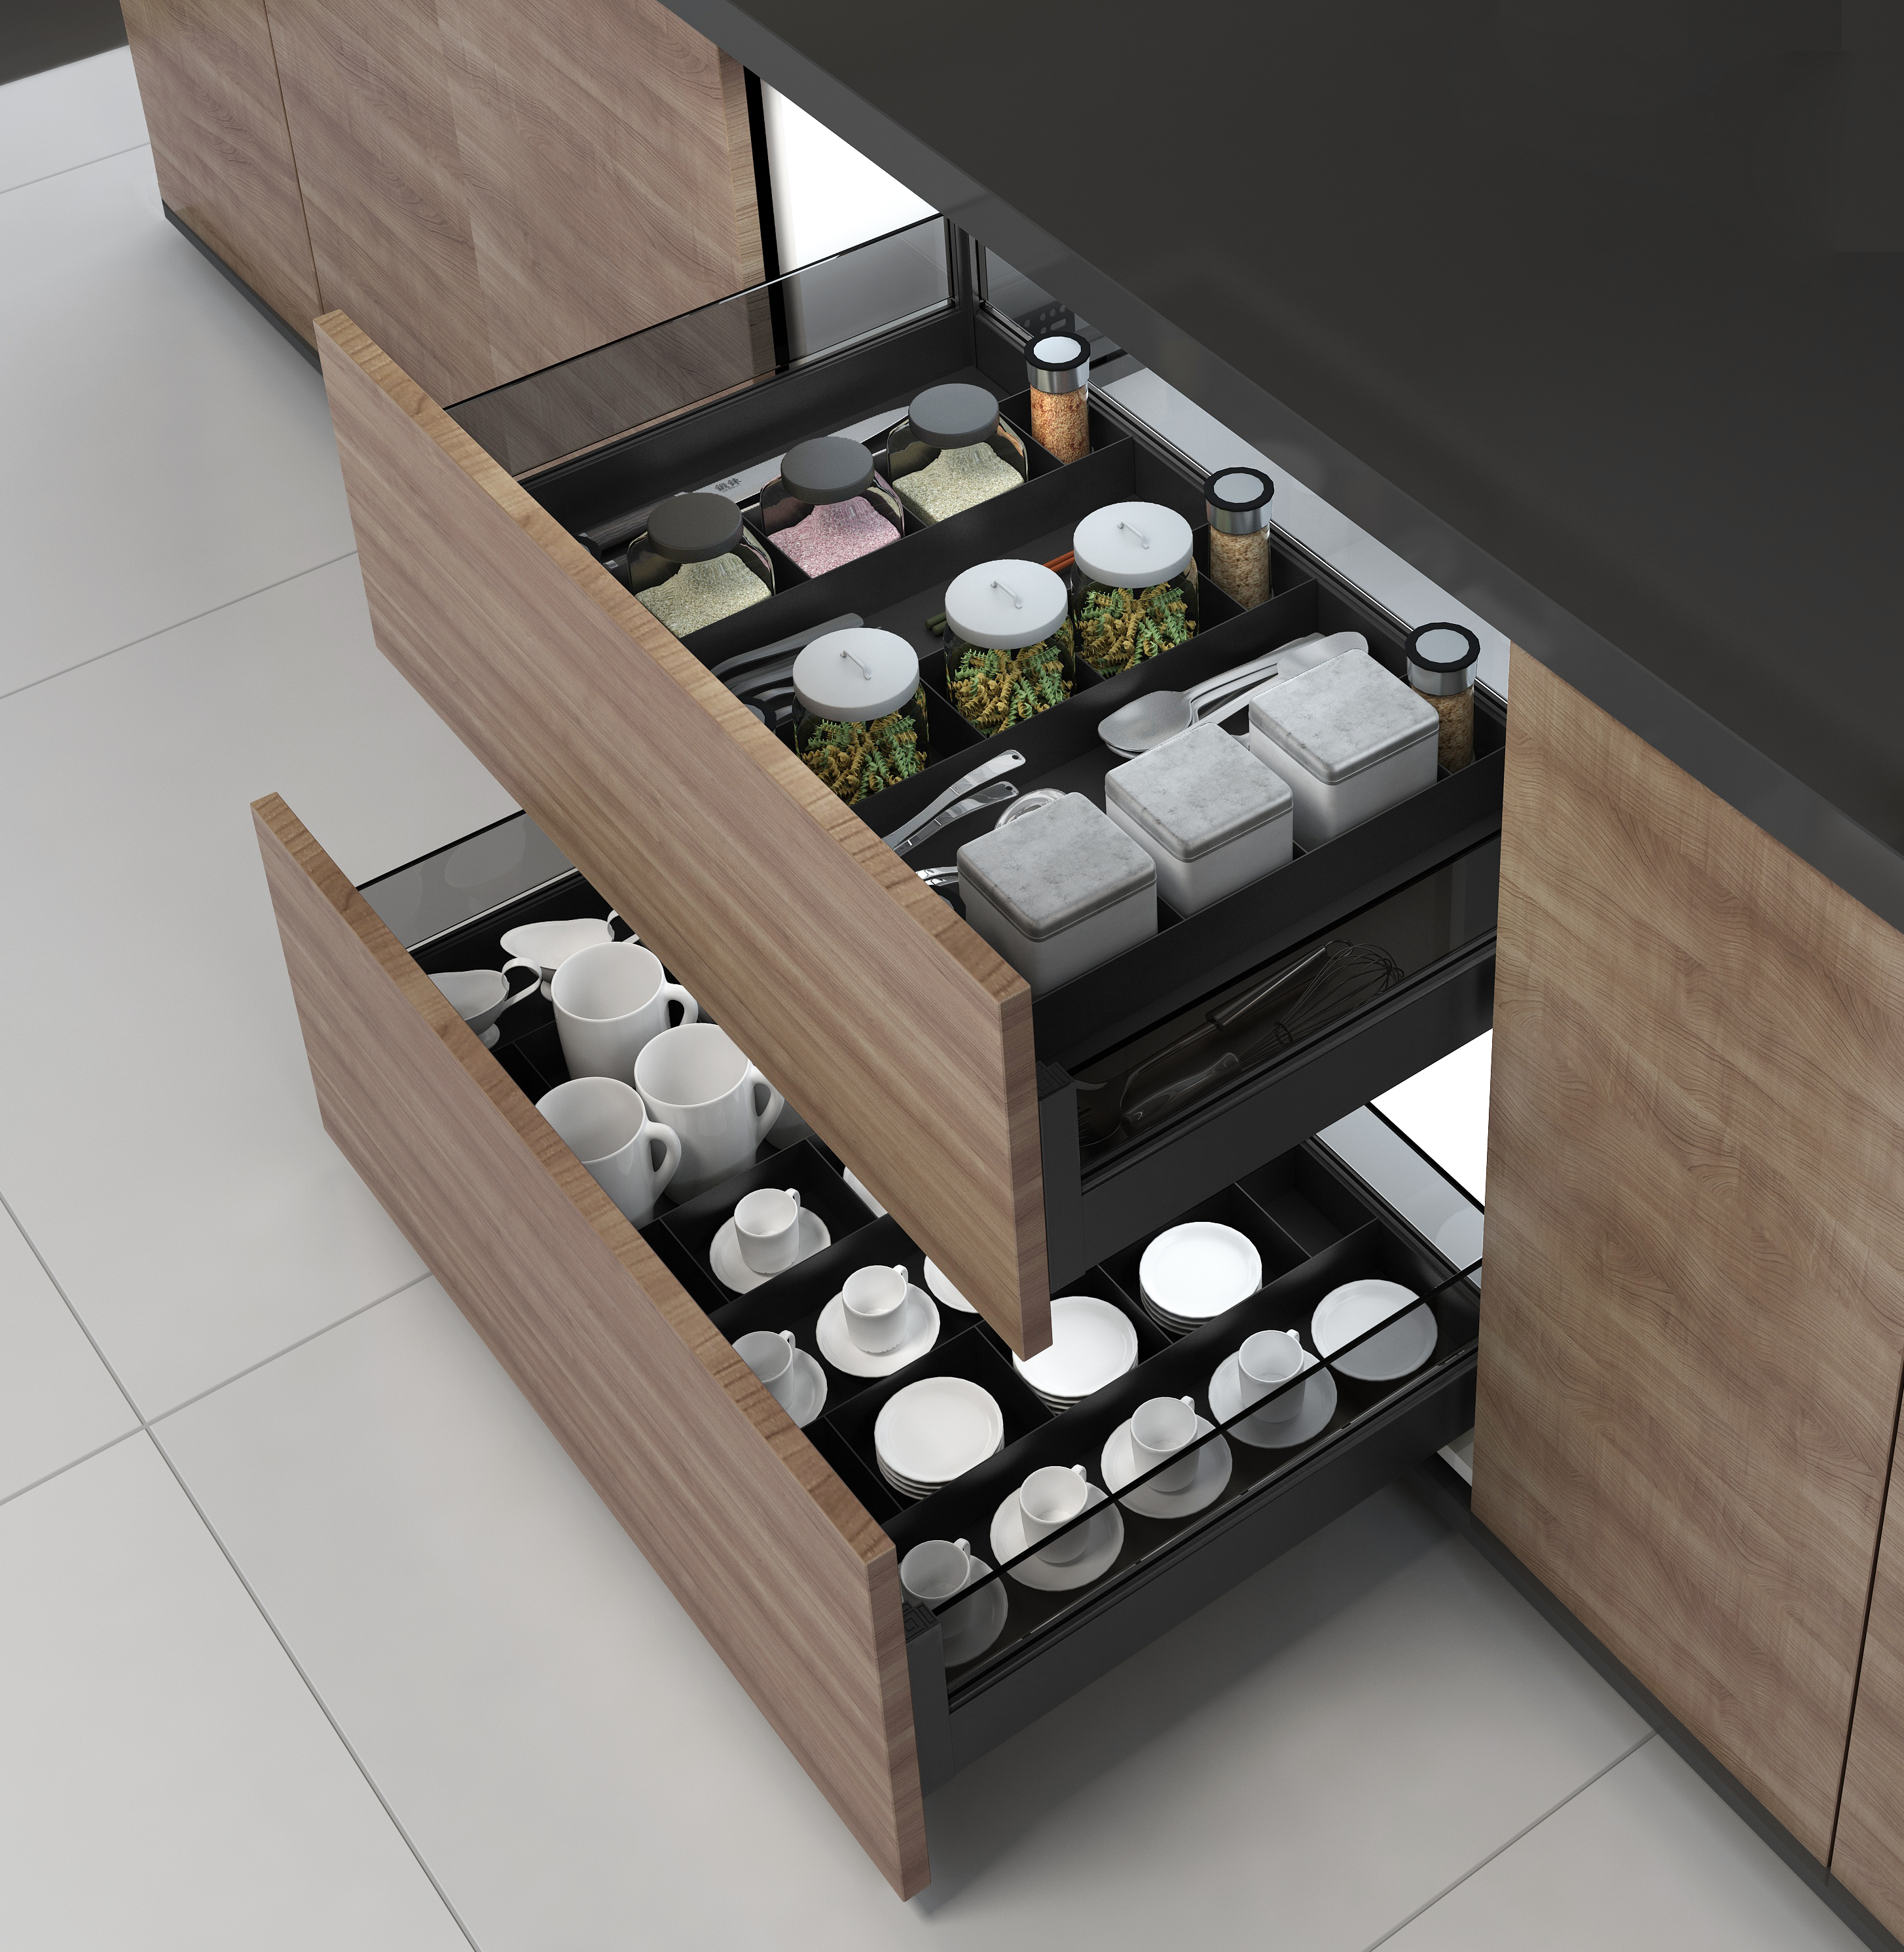 3 Kitchen Storage Solutions to make your life better